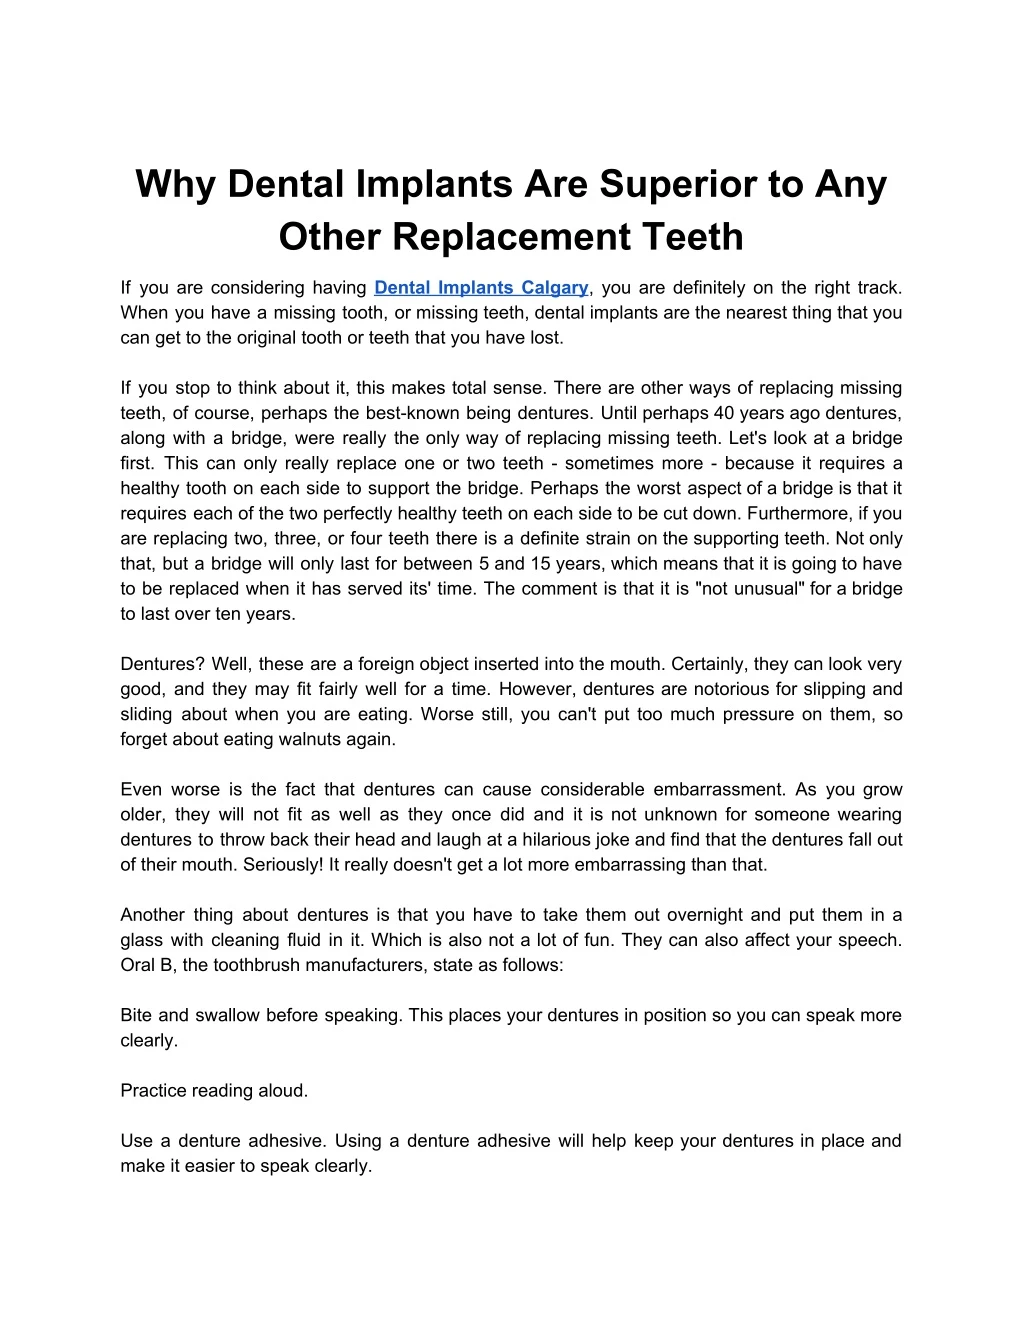 why dental implants are superior to any other